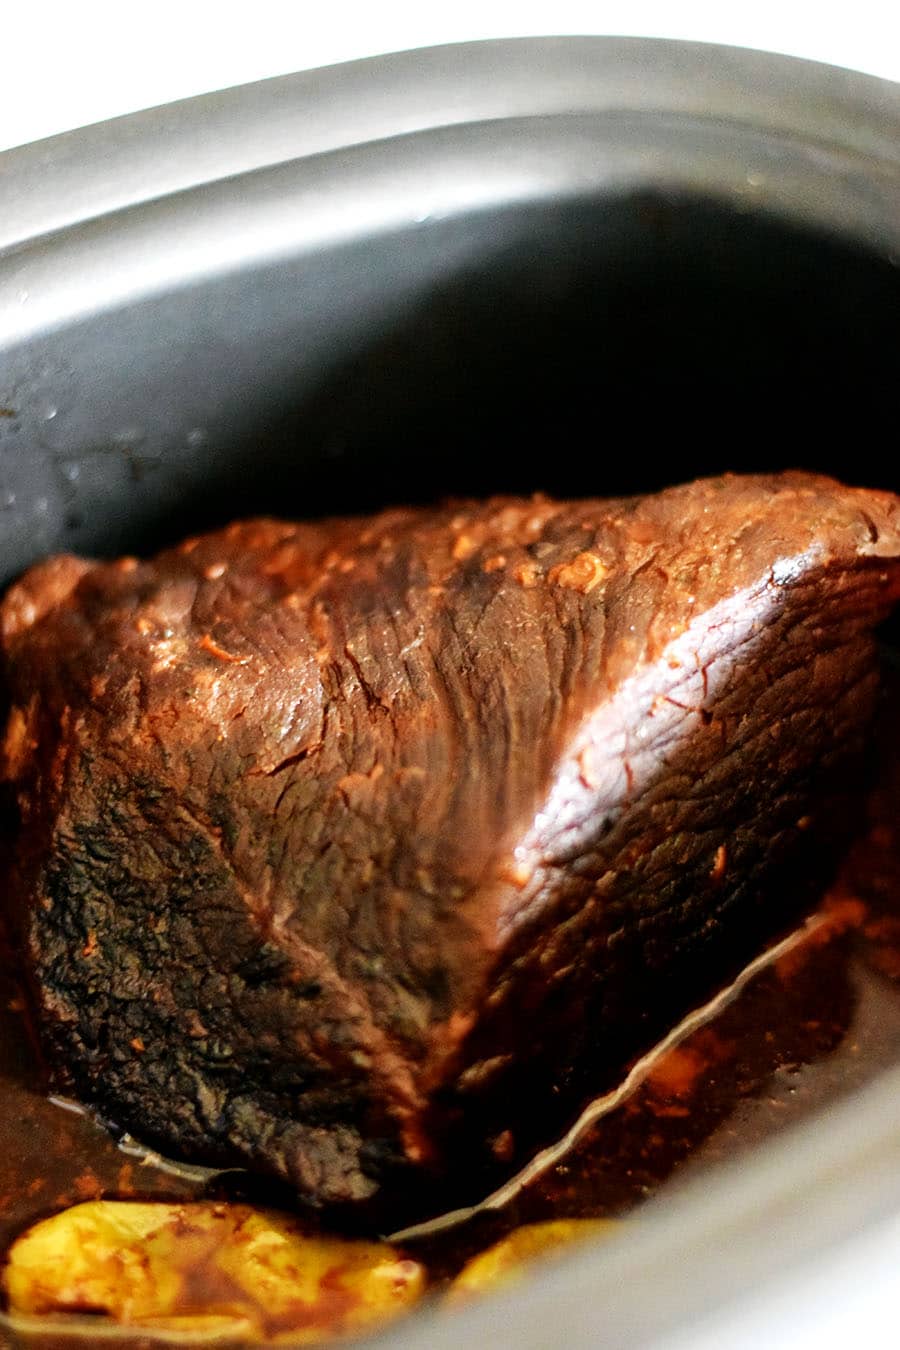 a cooked rump roast in a crock pot from this slow cooker mississippi pot roast recipe